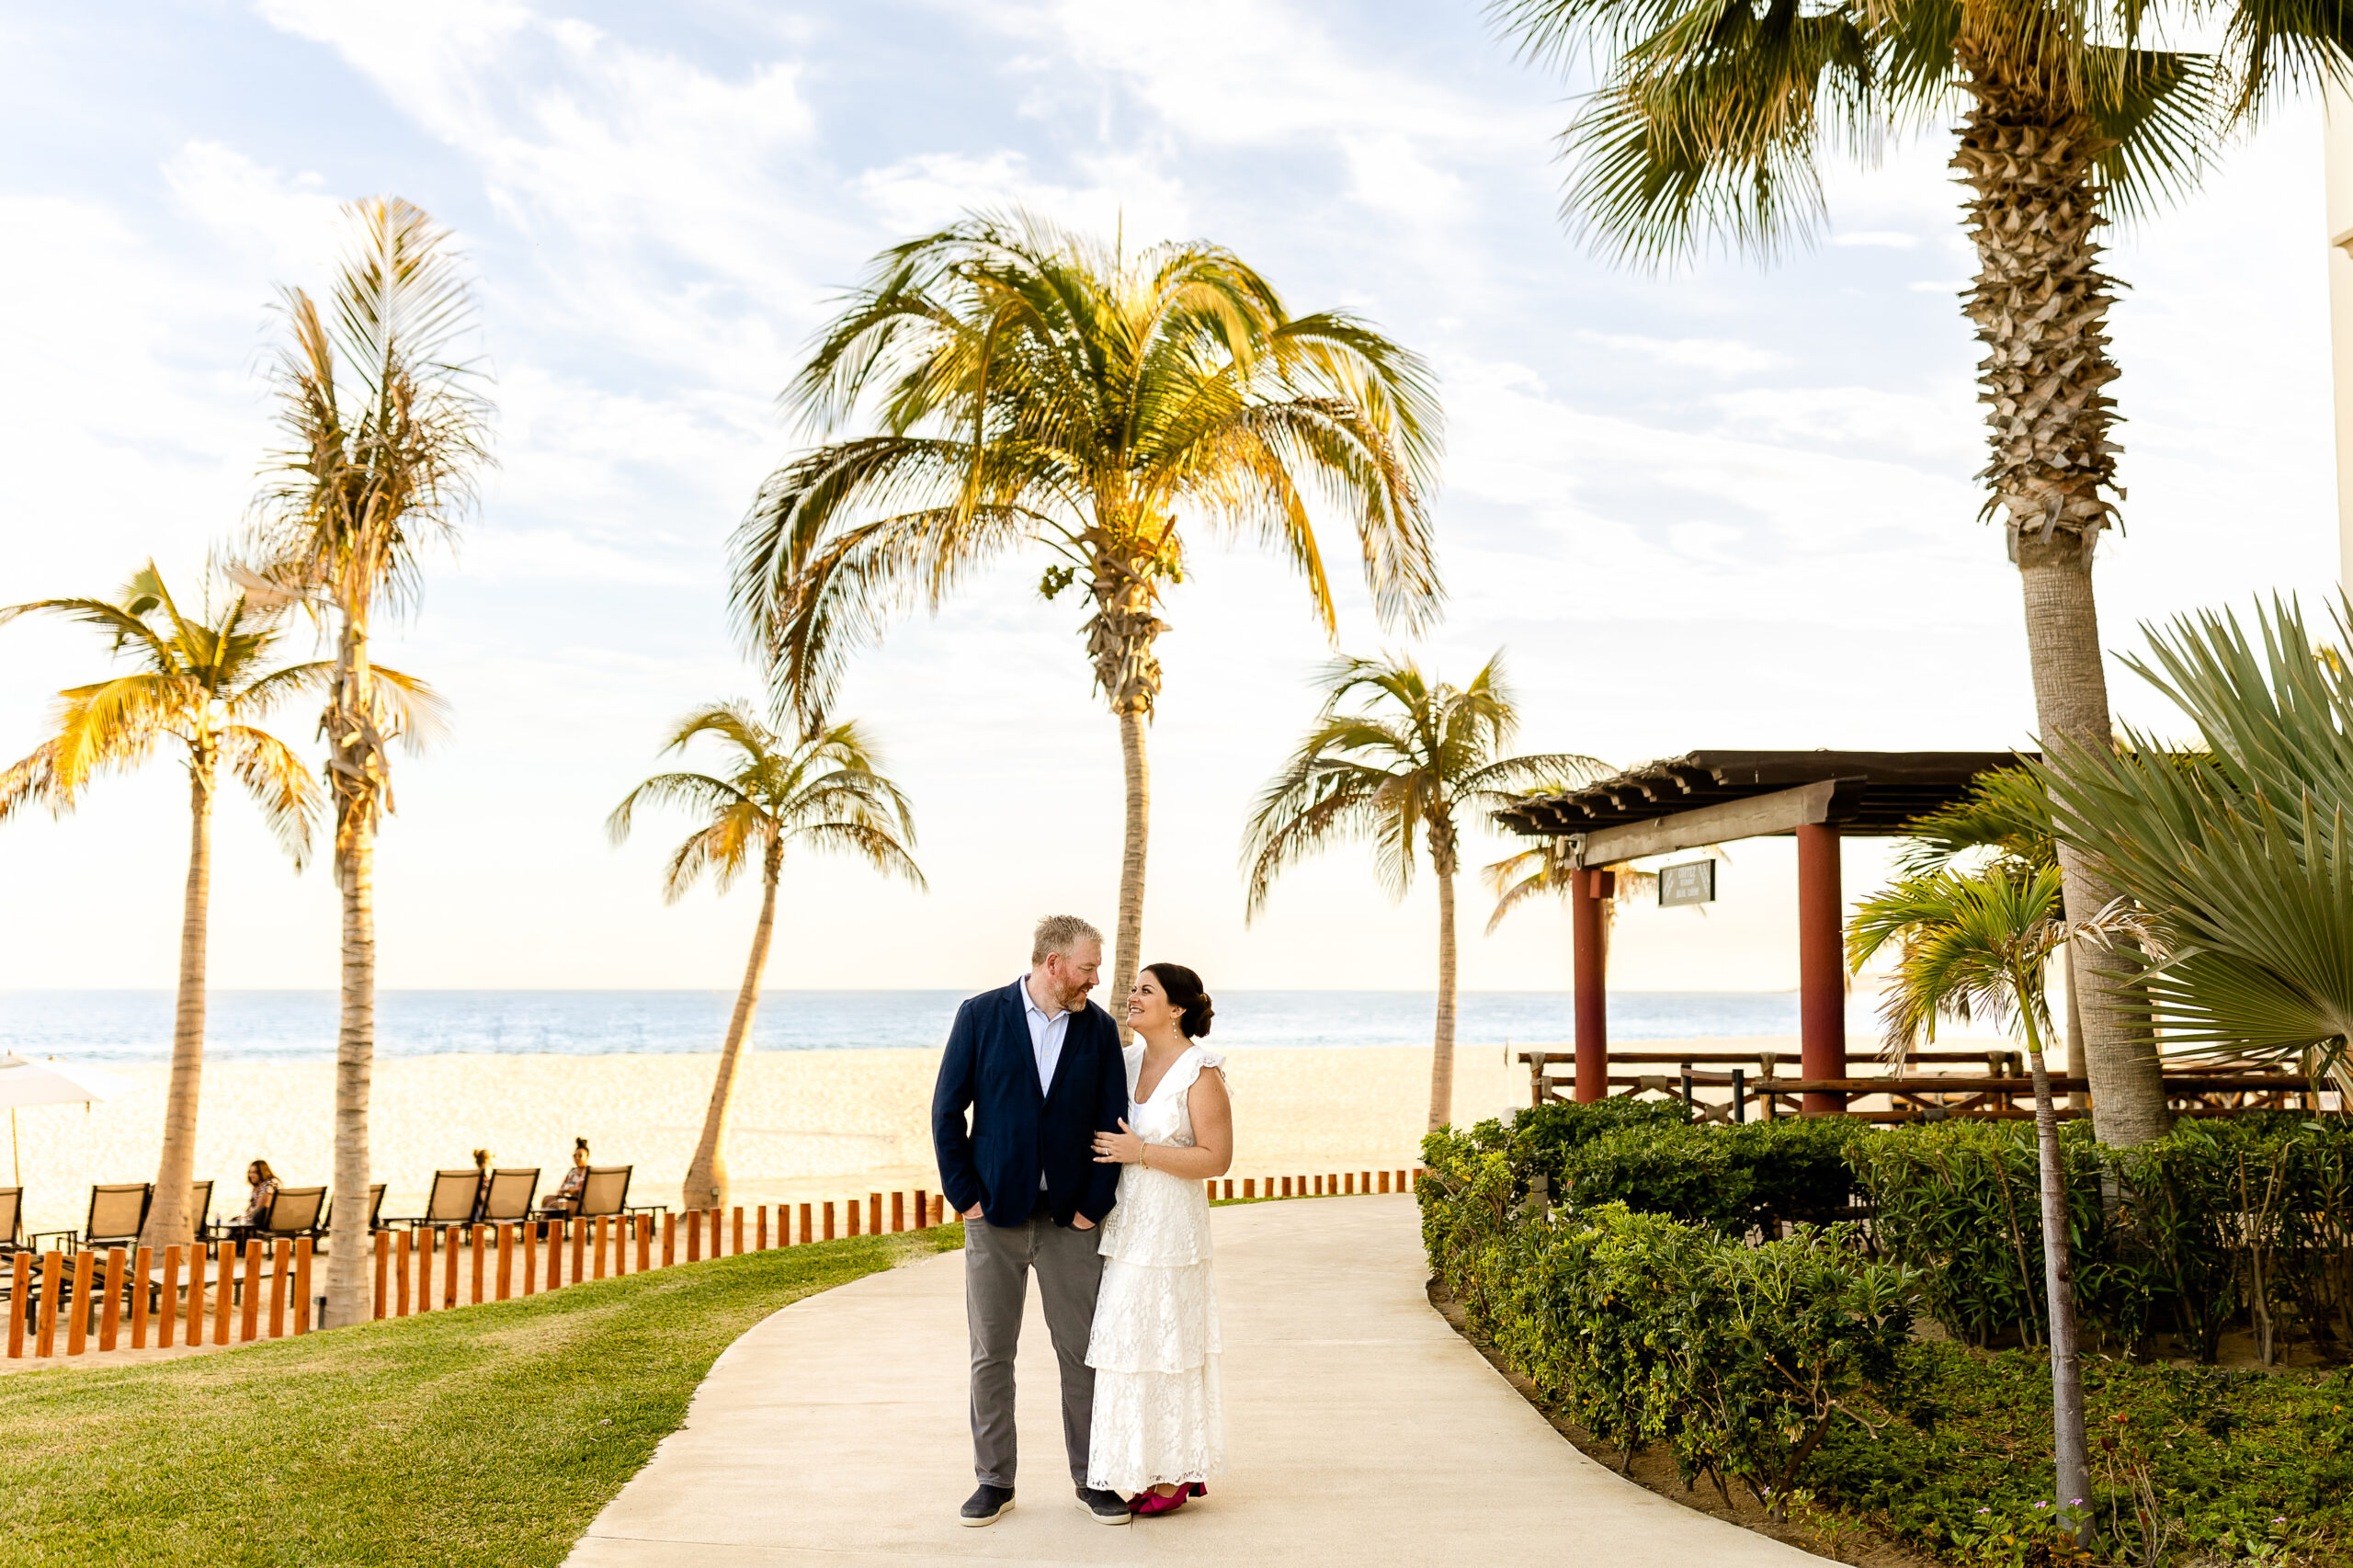 Couple smiling while looking at each other by the beach with palm trees